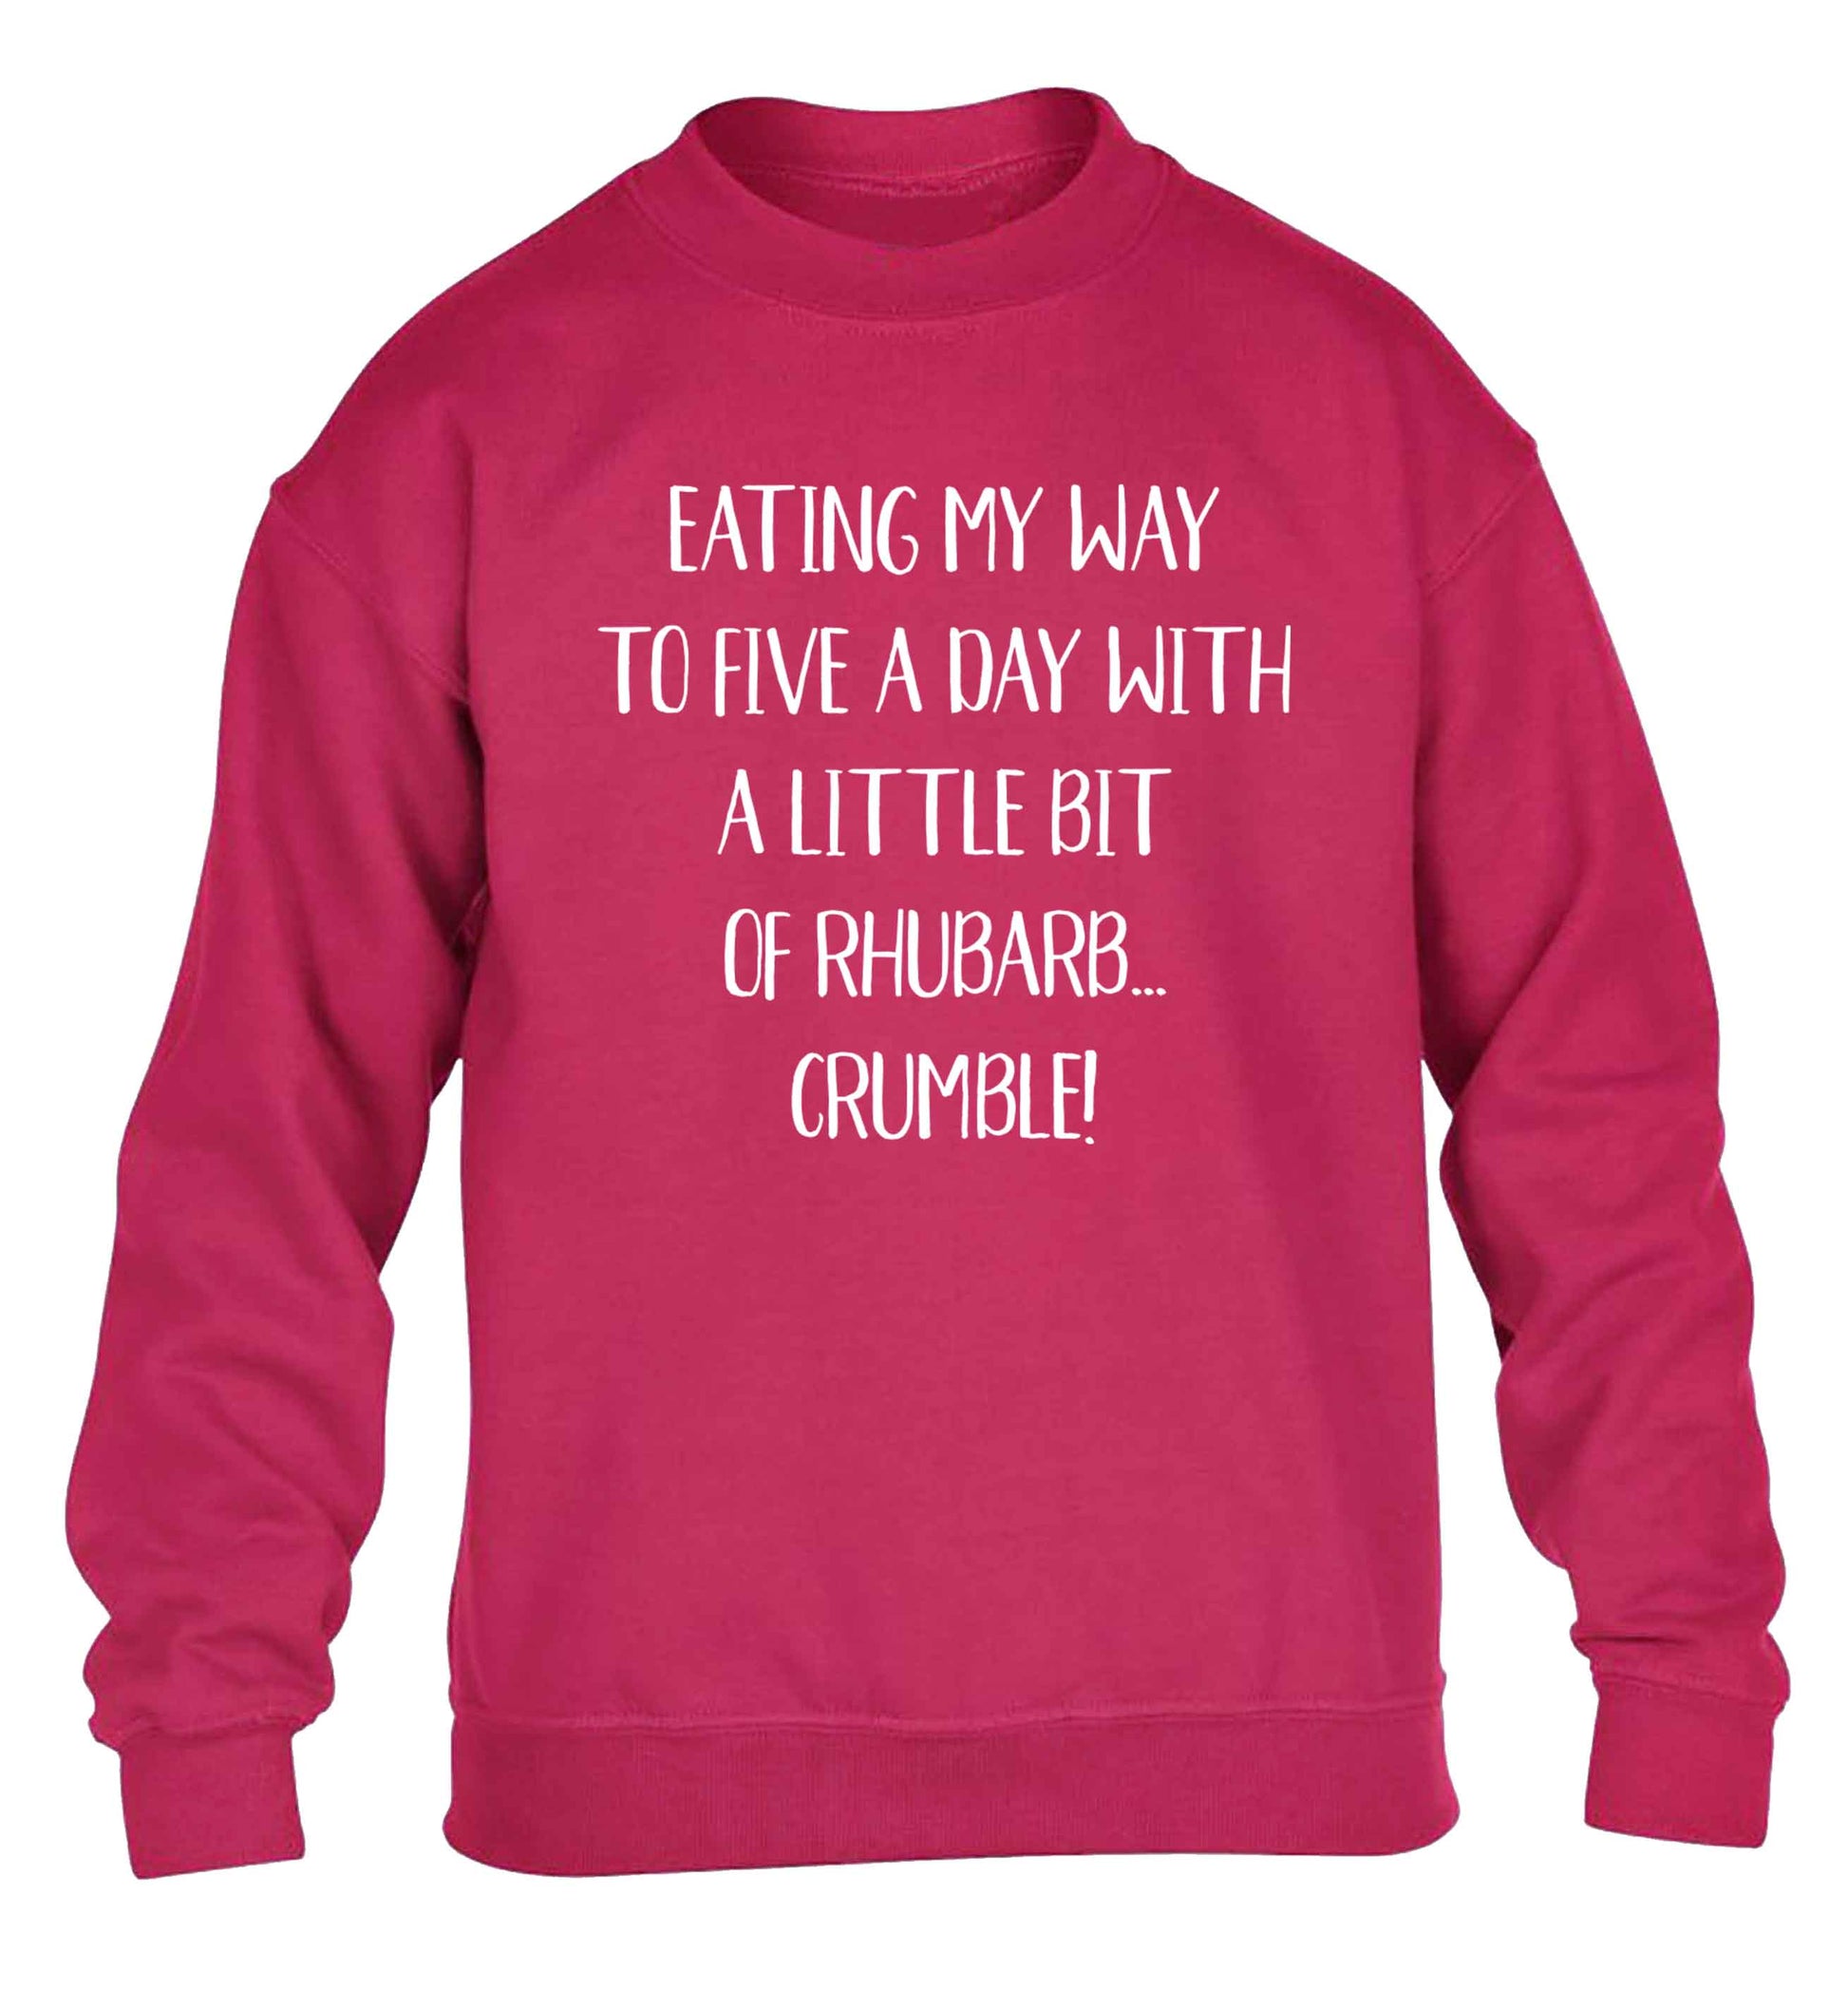 Eating my way to five a day with a little bit of rhubarb crumble children's pink sweater 12-13 Years